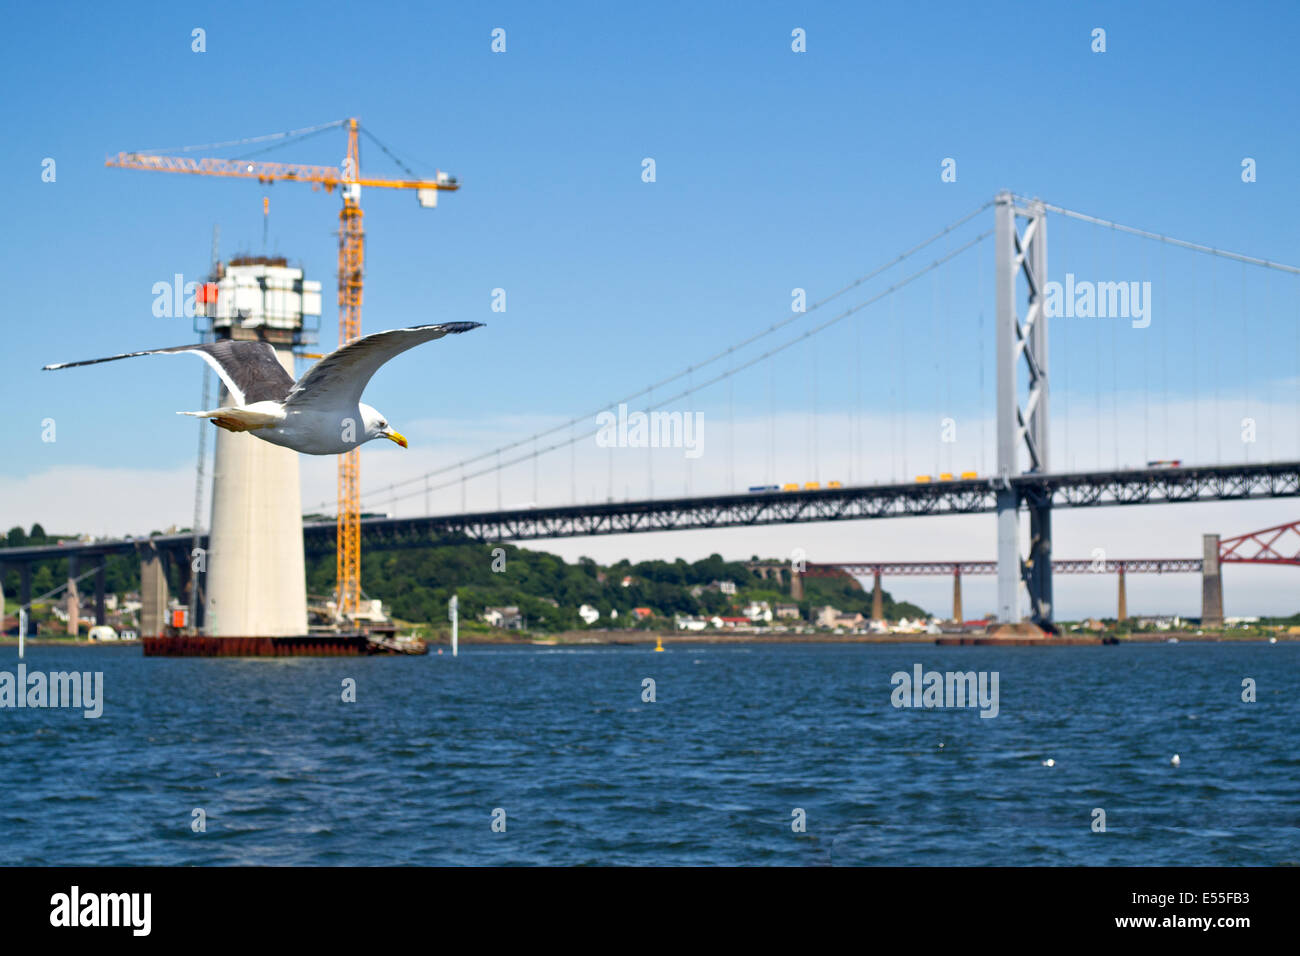 A view of the bridges crossing the Firth of Forth, Scotland. The pillar in the foreground is a foundation for the new crossing. Stock Photo